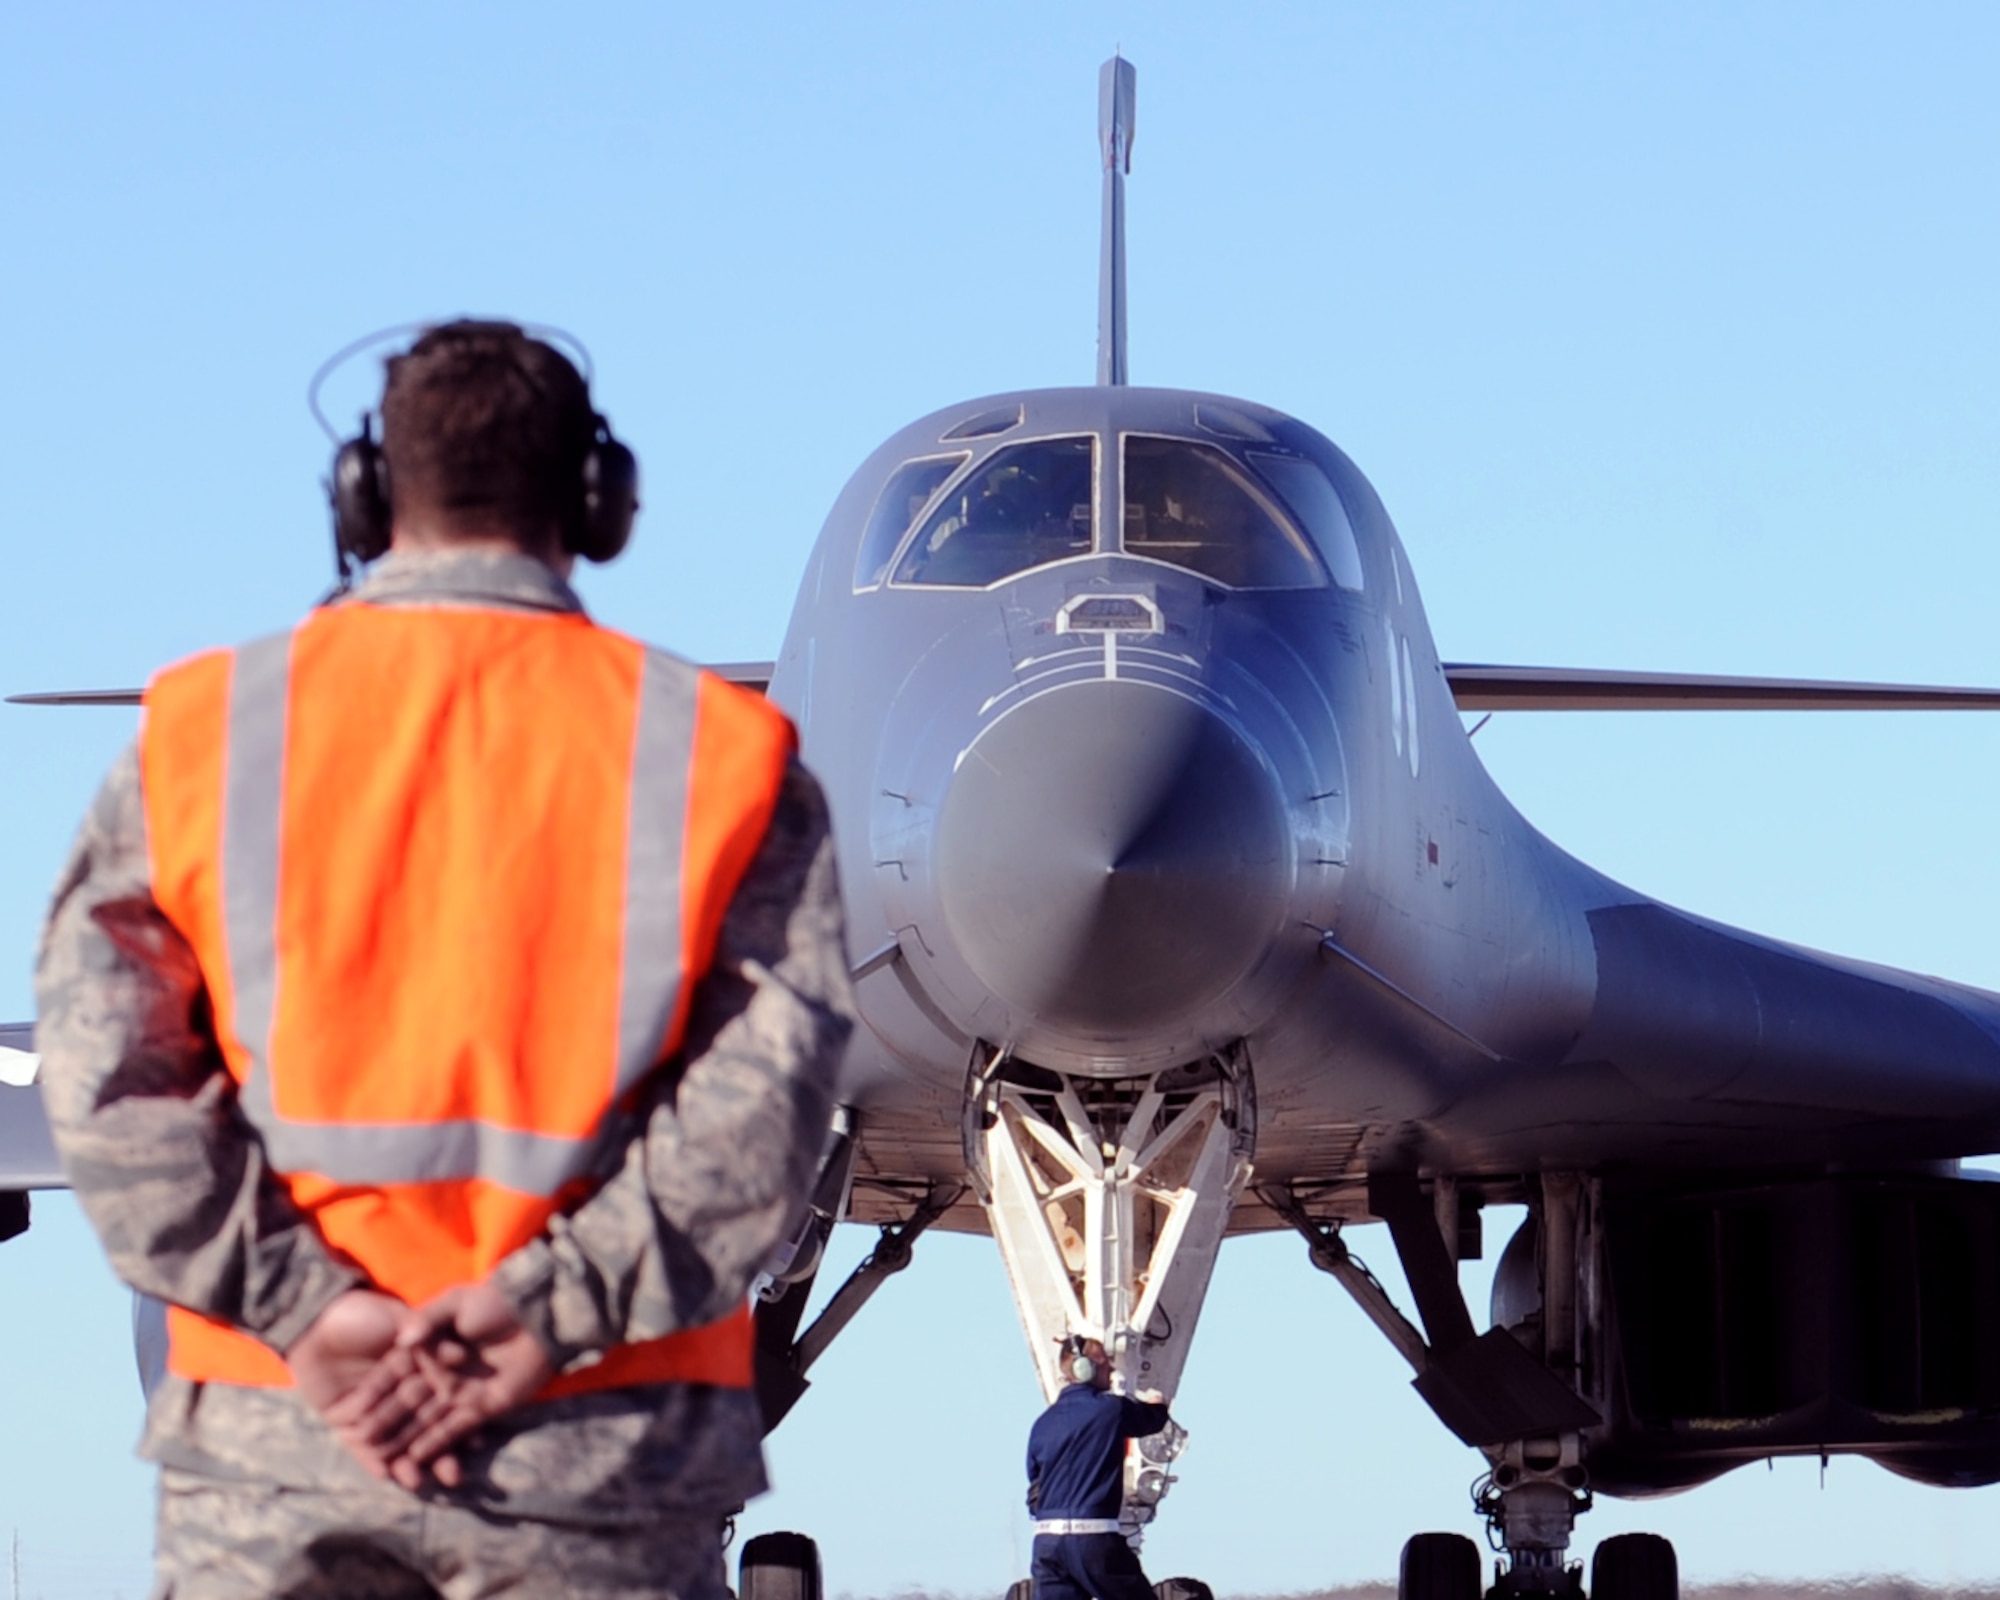 A U.S. Air Force crew chief marshals out a B-1 Bomber carrying a BLU-129, Jan. 20, 2012, at Dyess Air Force Base, Texas. The BLU-129 is a 500-pound guided bomb designed with a composite warhead to destroy targets while causing the lease amount of collateral damage. (U.S. Air Force photo by Airman 1st Class Jonathan Stefanko/Released)